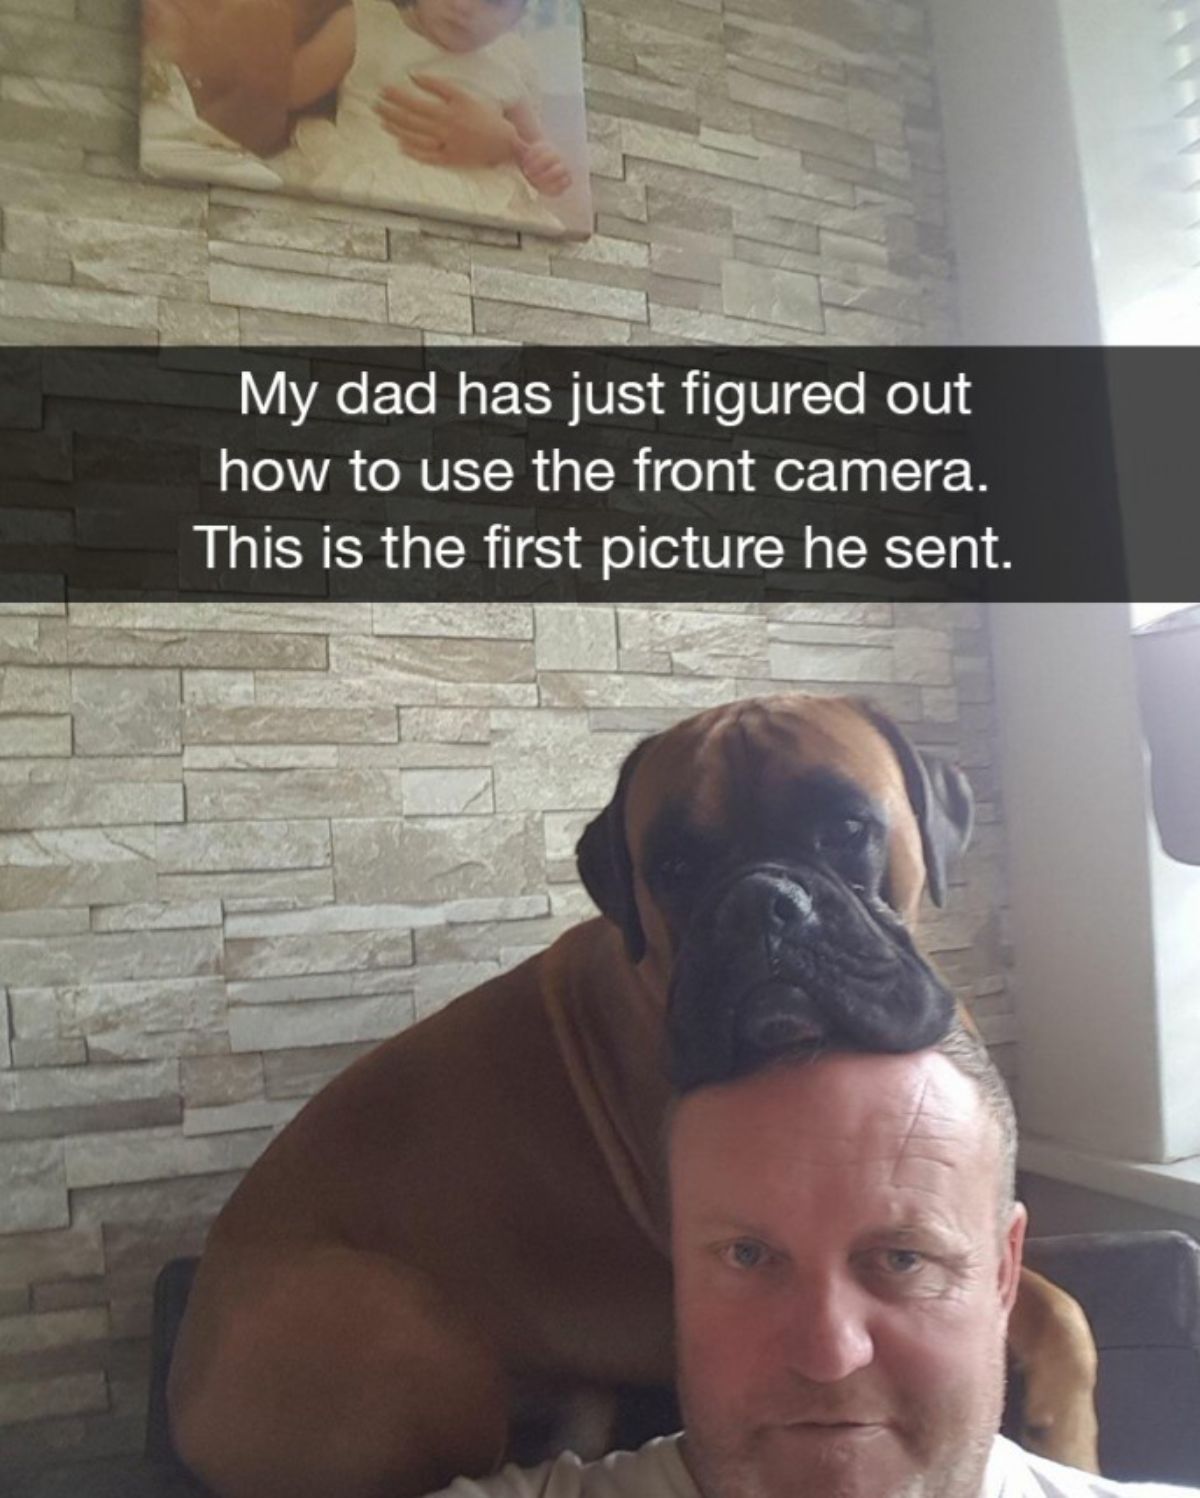 selfie of brown boxer placing the chin on a bald man's head